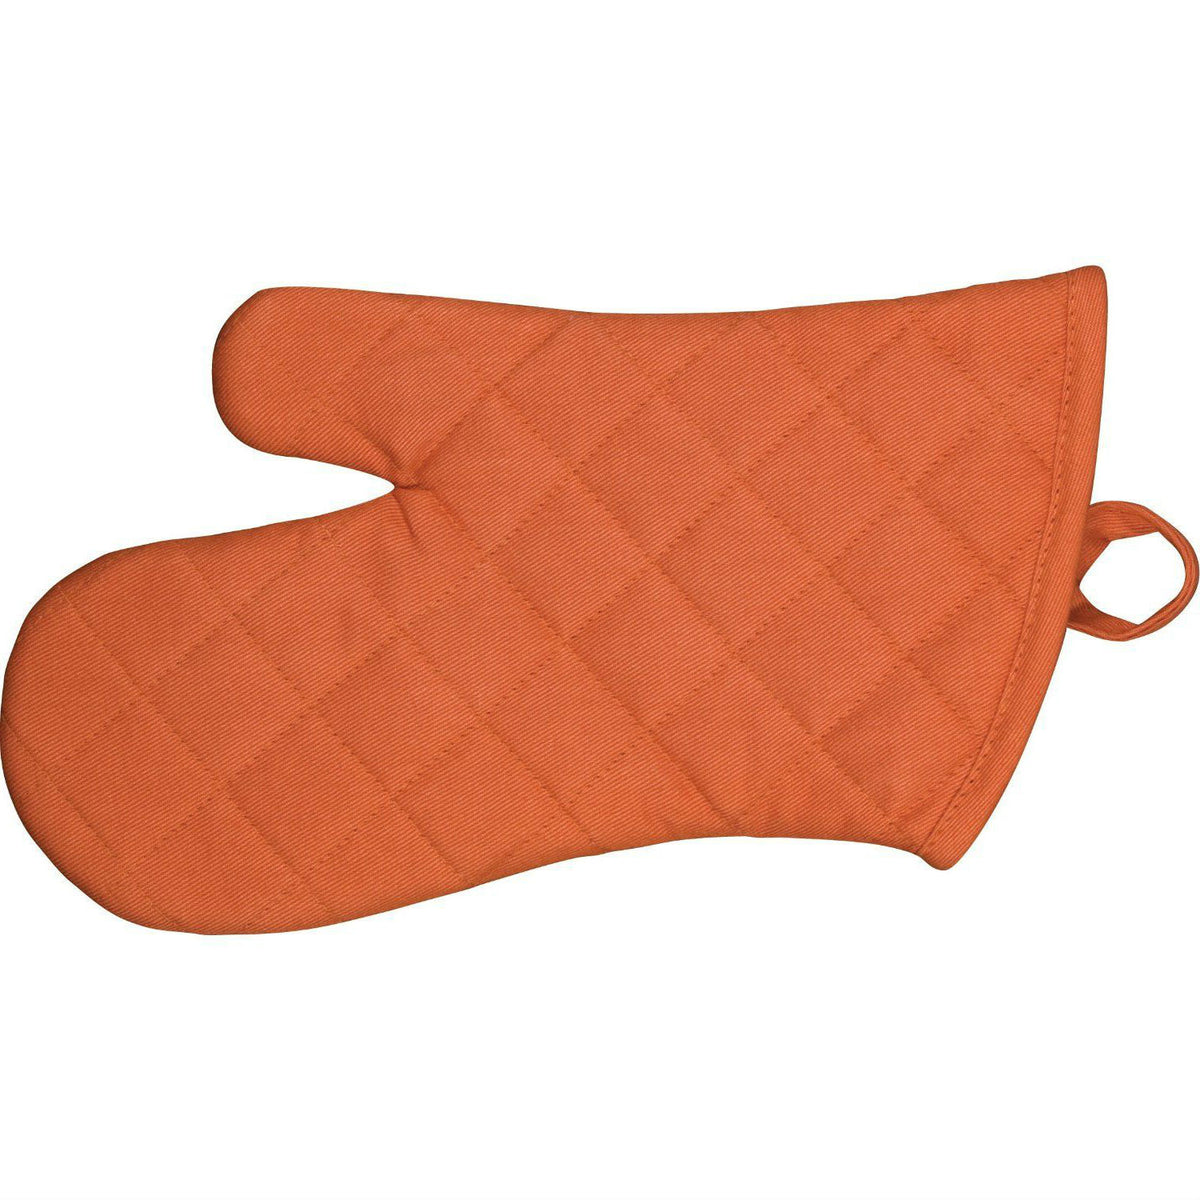 buy oven mitts & kitchen textiles at cheap rate in bulk. wholesale & retail kitchen goods & supplies store.